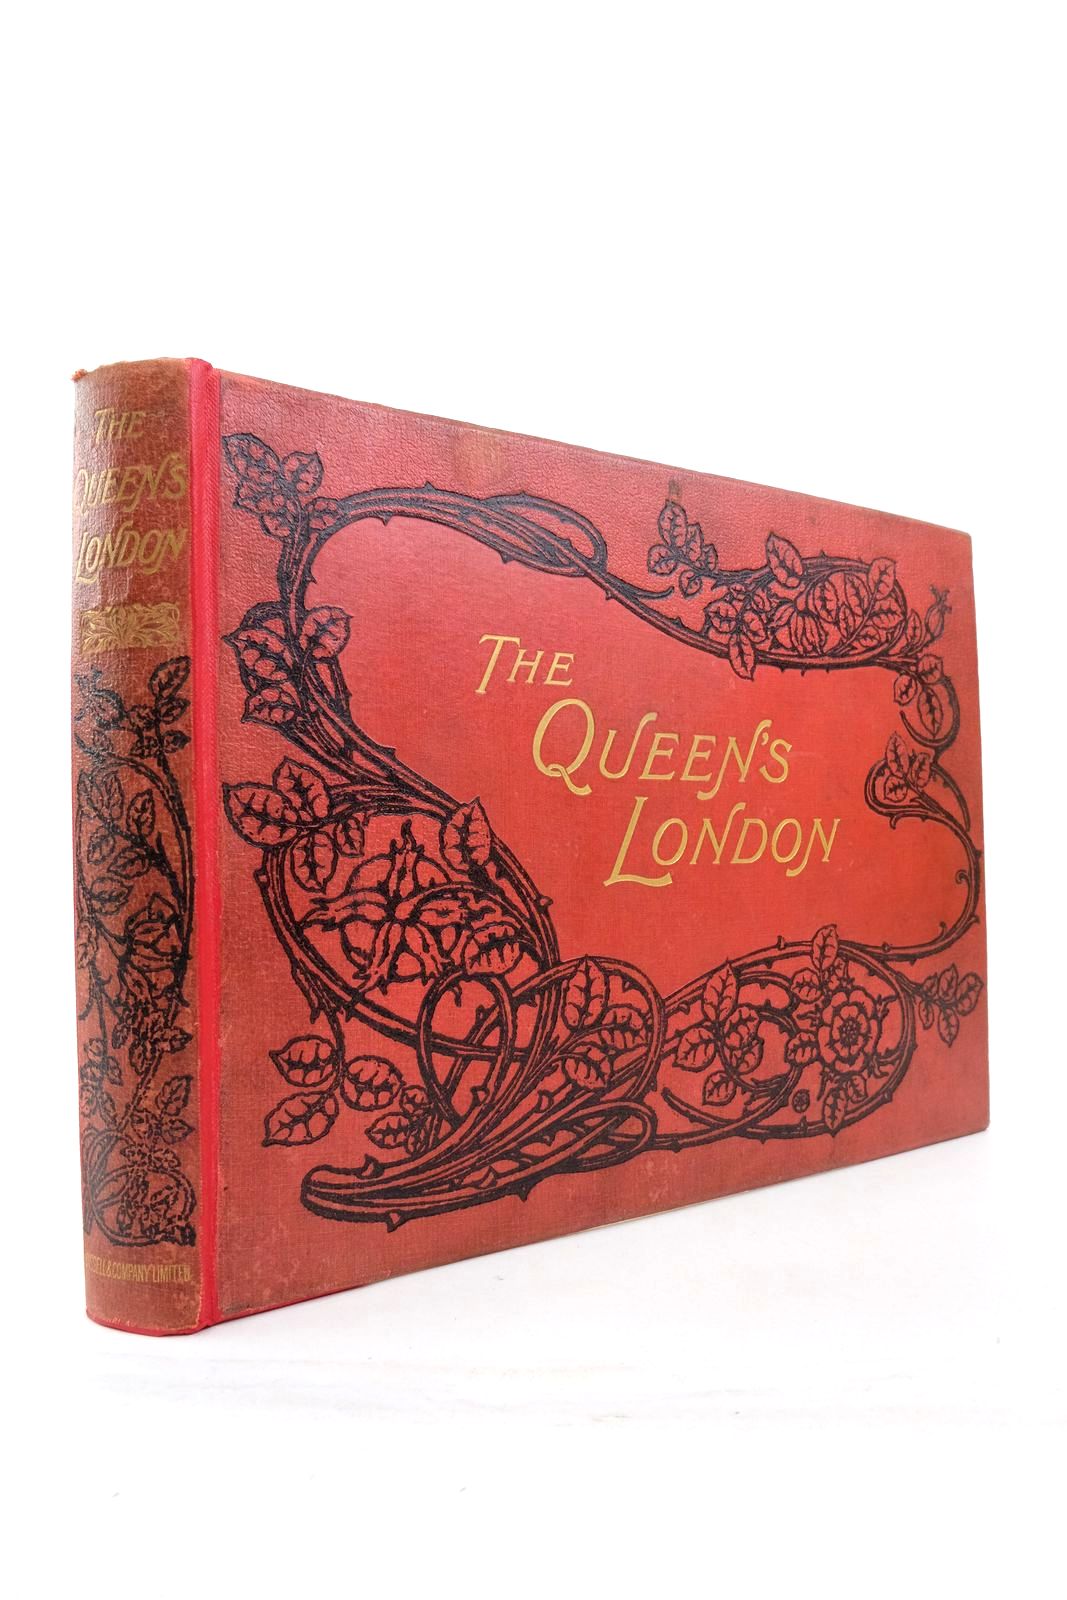 Photo of THE QUEEN'S LONDON published by Cassell &amp; Company Limited (STOCK CODE: 2137886)  for sale by Stella & Rose's Books